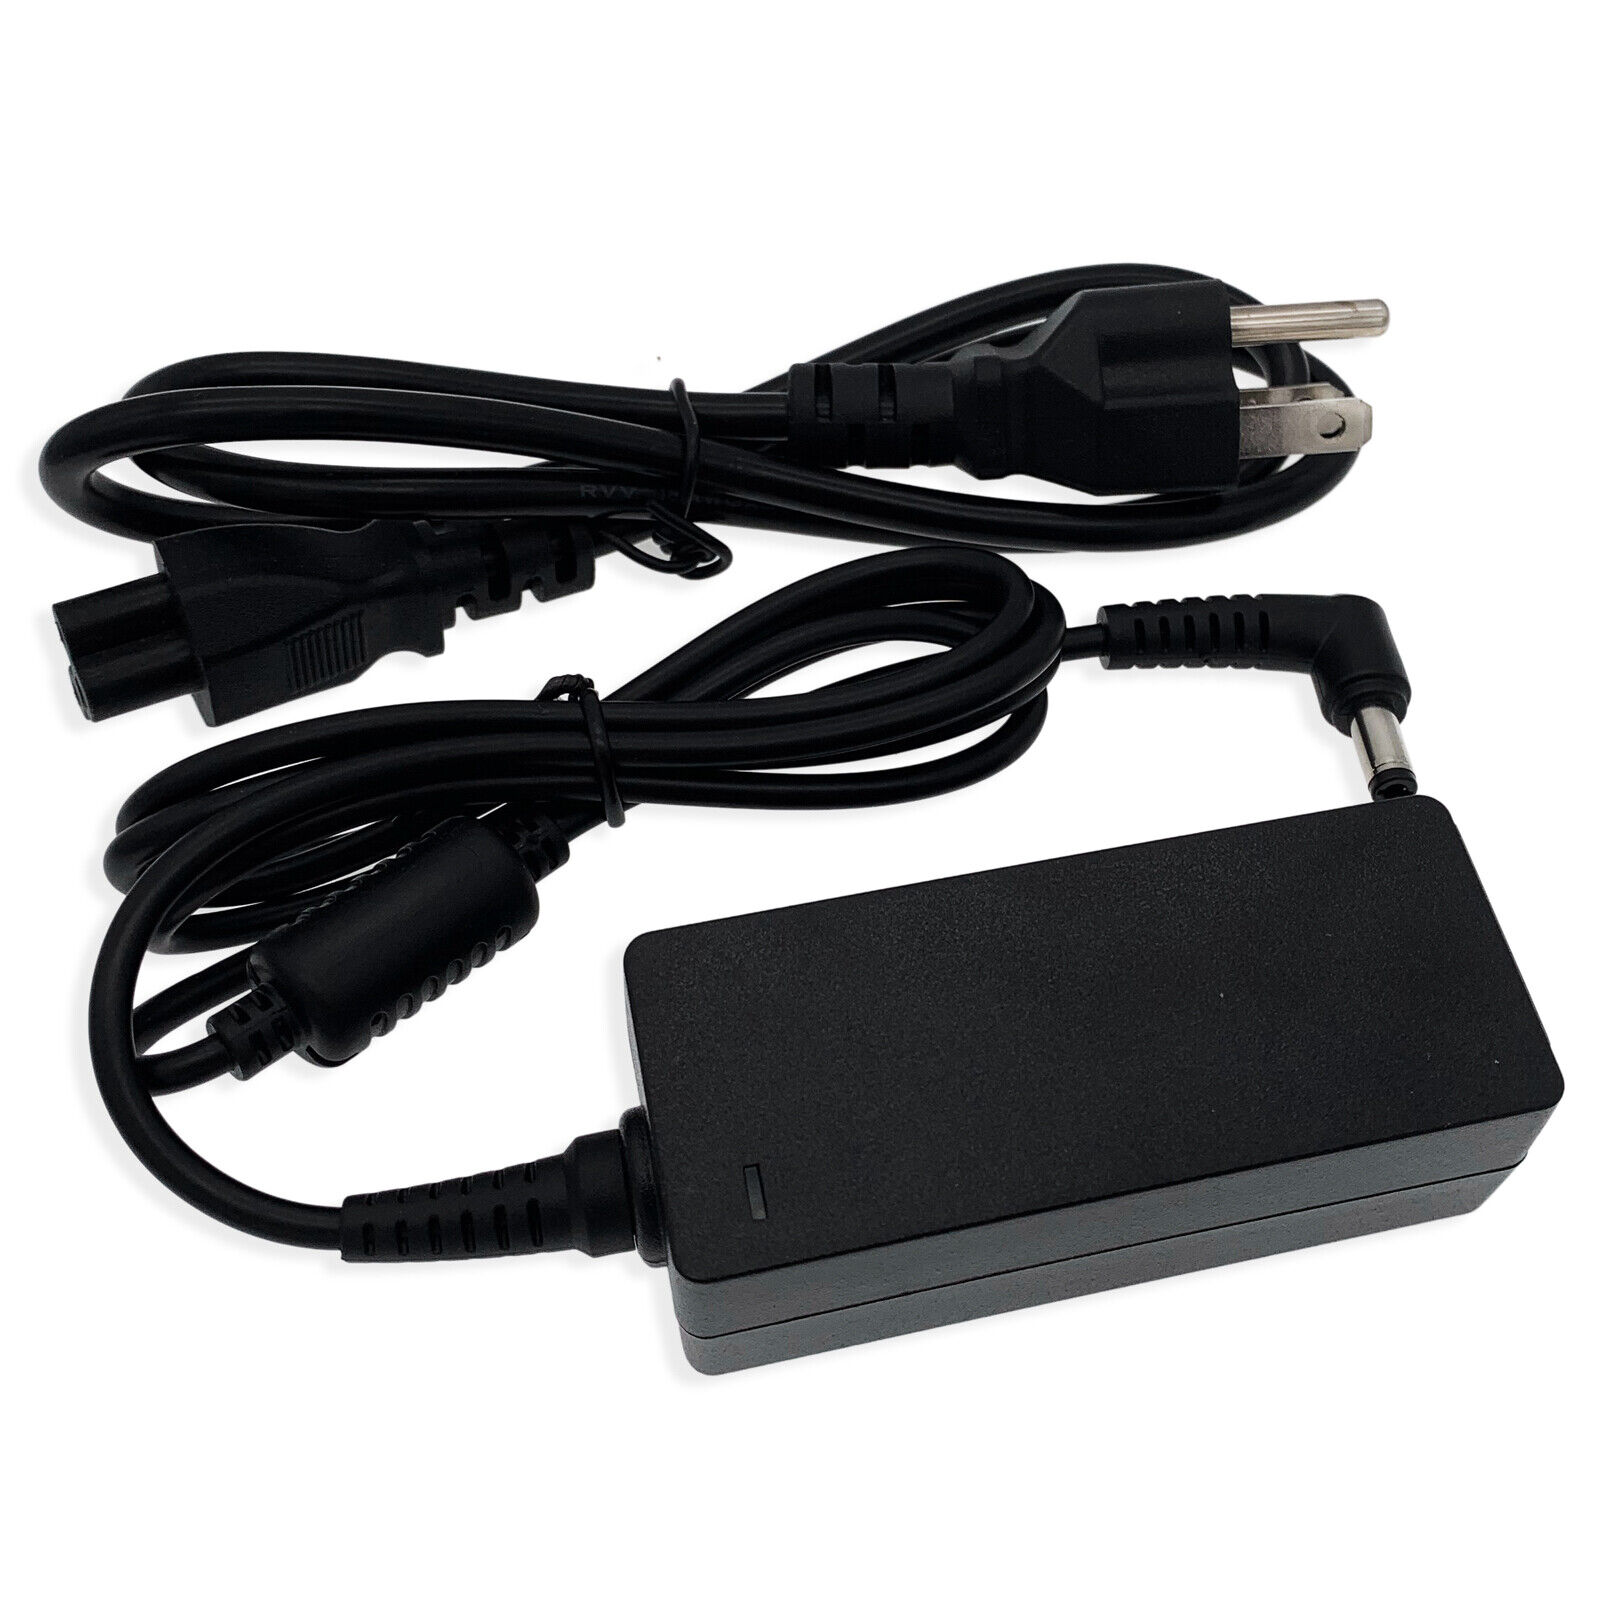 AC Adapter For Verizon FiOS G3100 Home Network Modem/Router Power Supply Charger Condition: Brand N